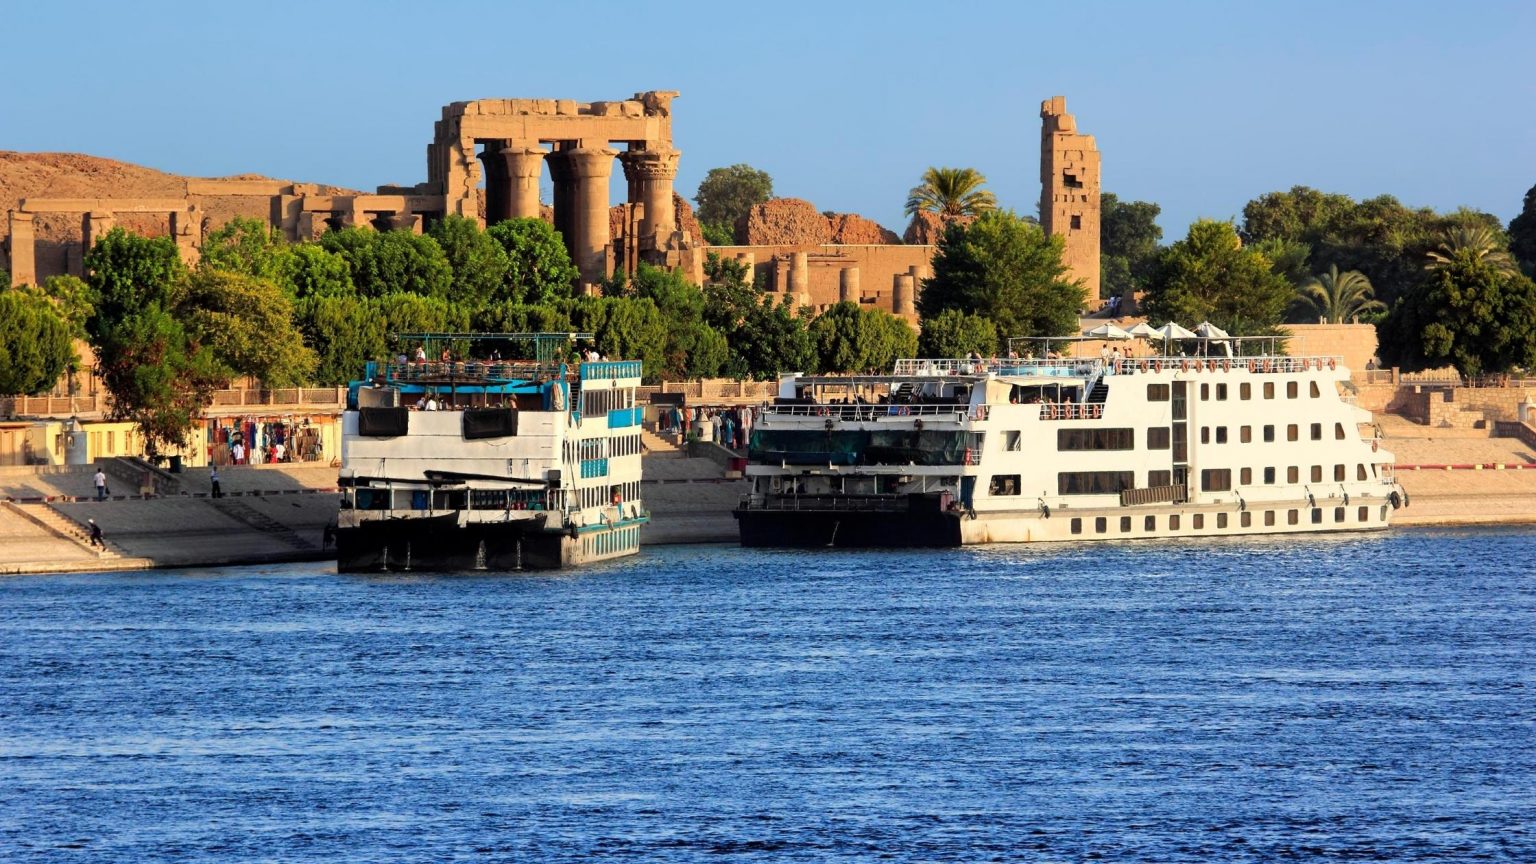 Top 10 Bucket List River Nile Cruises Not To Miss In Egypt ItsAllBee Solo Travel & Adventure